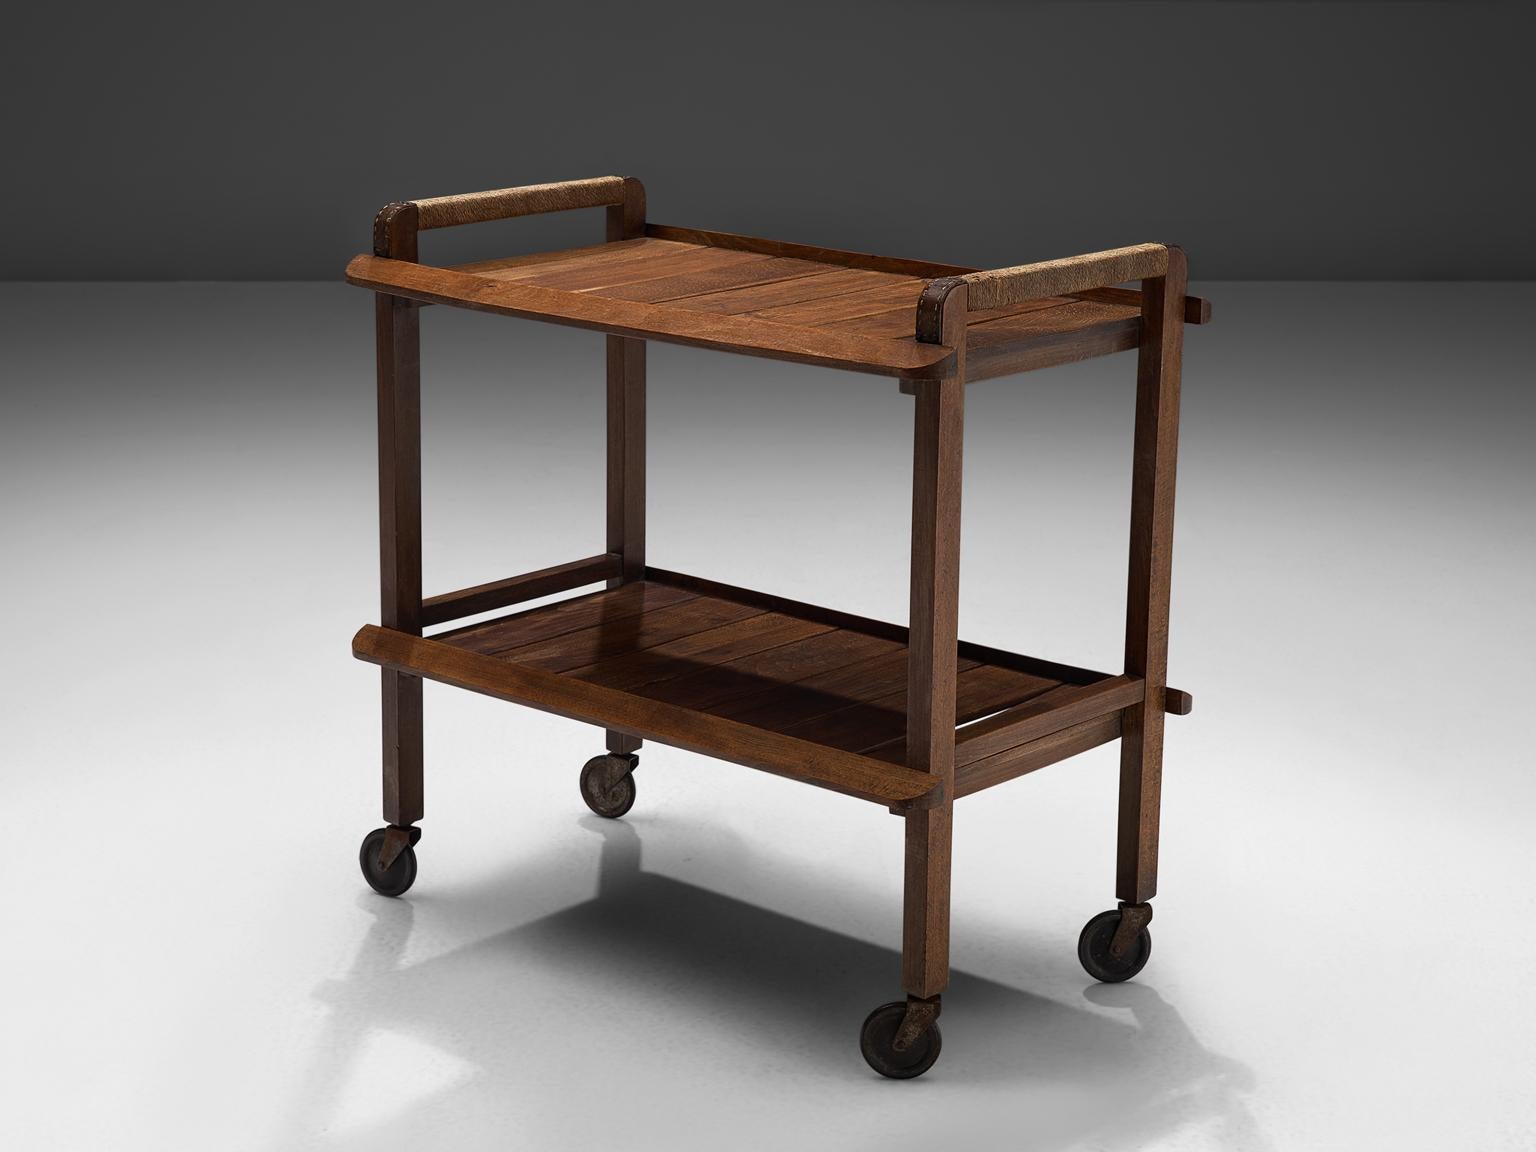 Trolley, wood, cord, metal, France, 1950s.

This solid bar cart has been executed with wooden top and bottom shelves. The piece has a solid wooden frame that has patinated over time and forms a warm, striking contrast to the cord elements. The